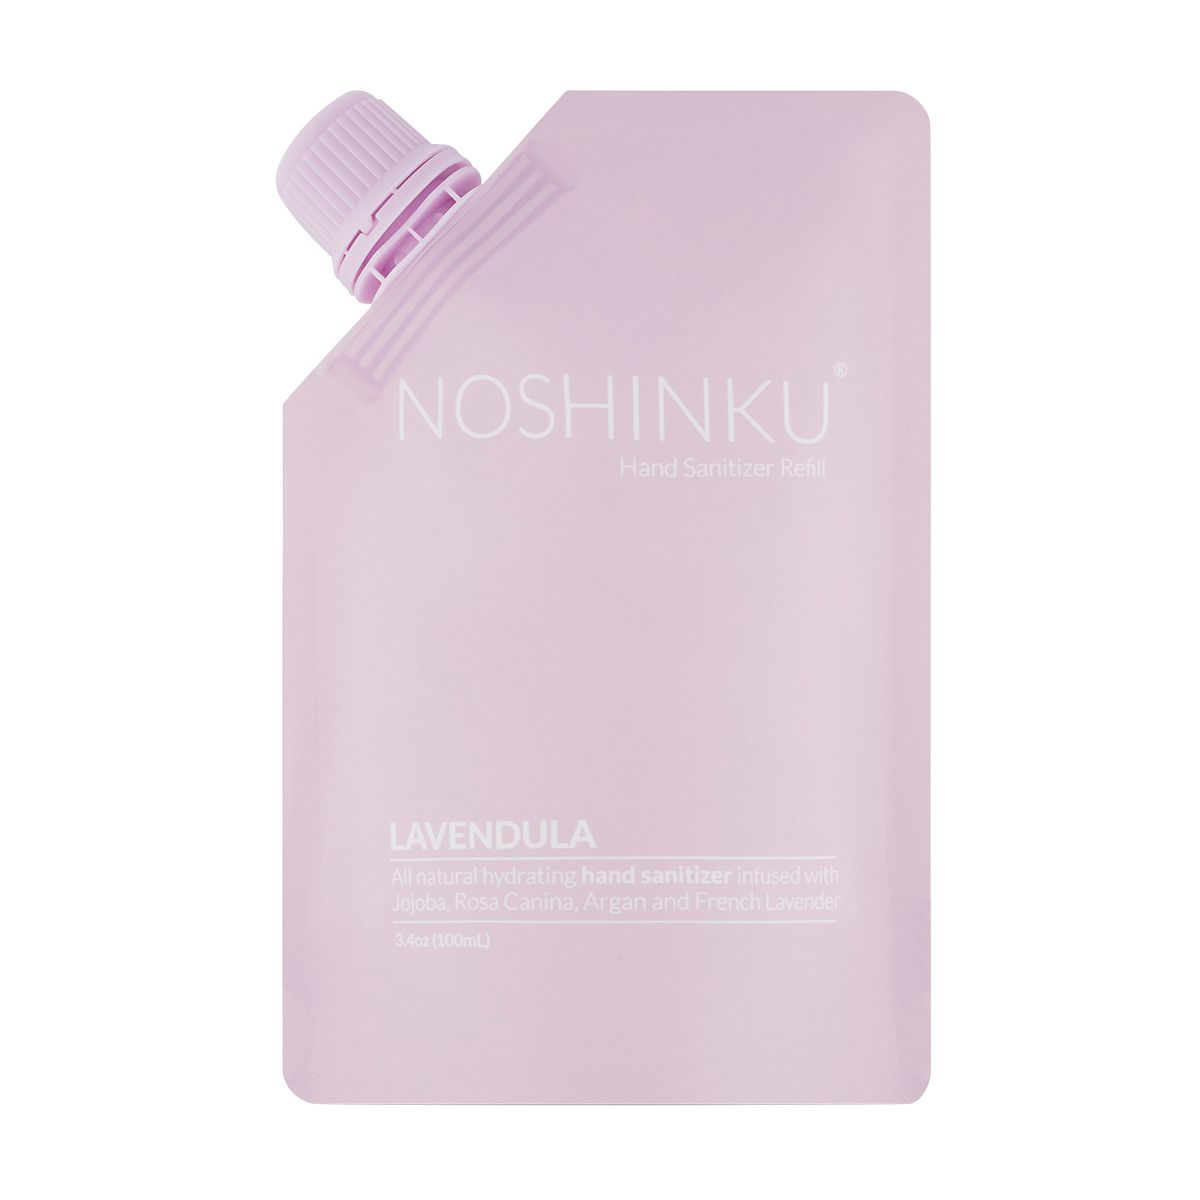 Noshinku Pocket Hand Sanitizer Refill | The Container Store